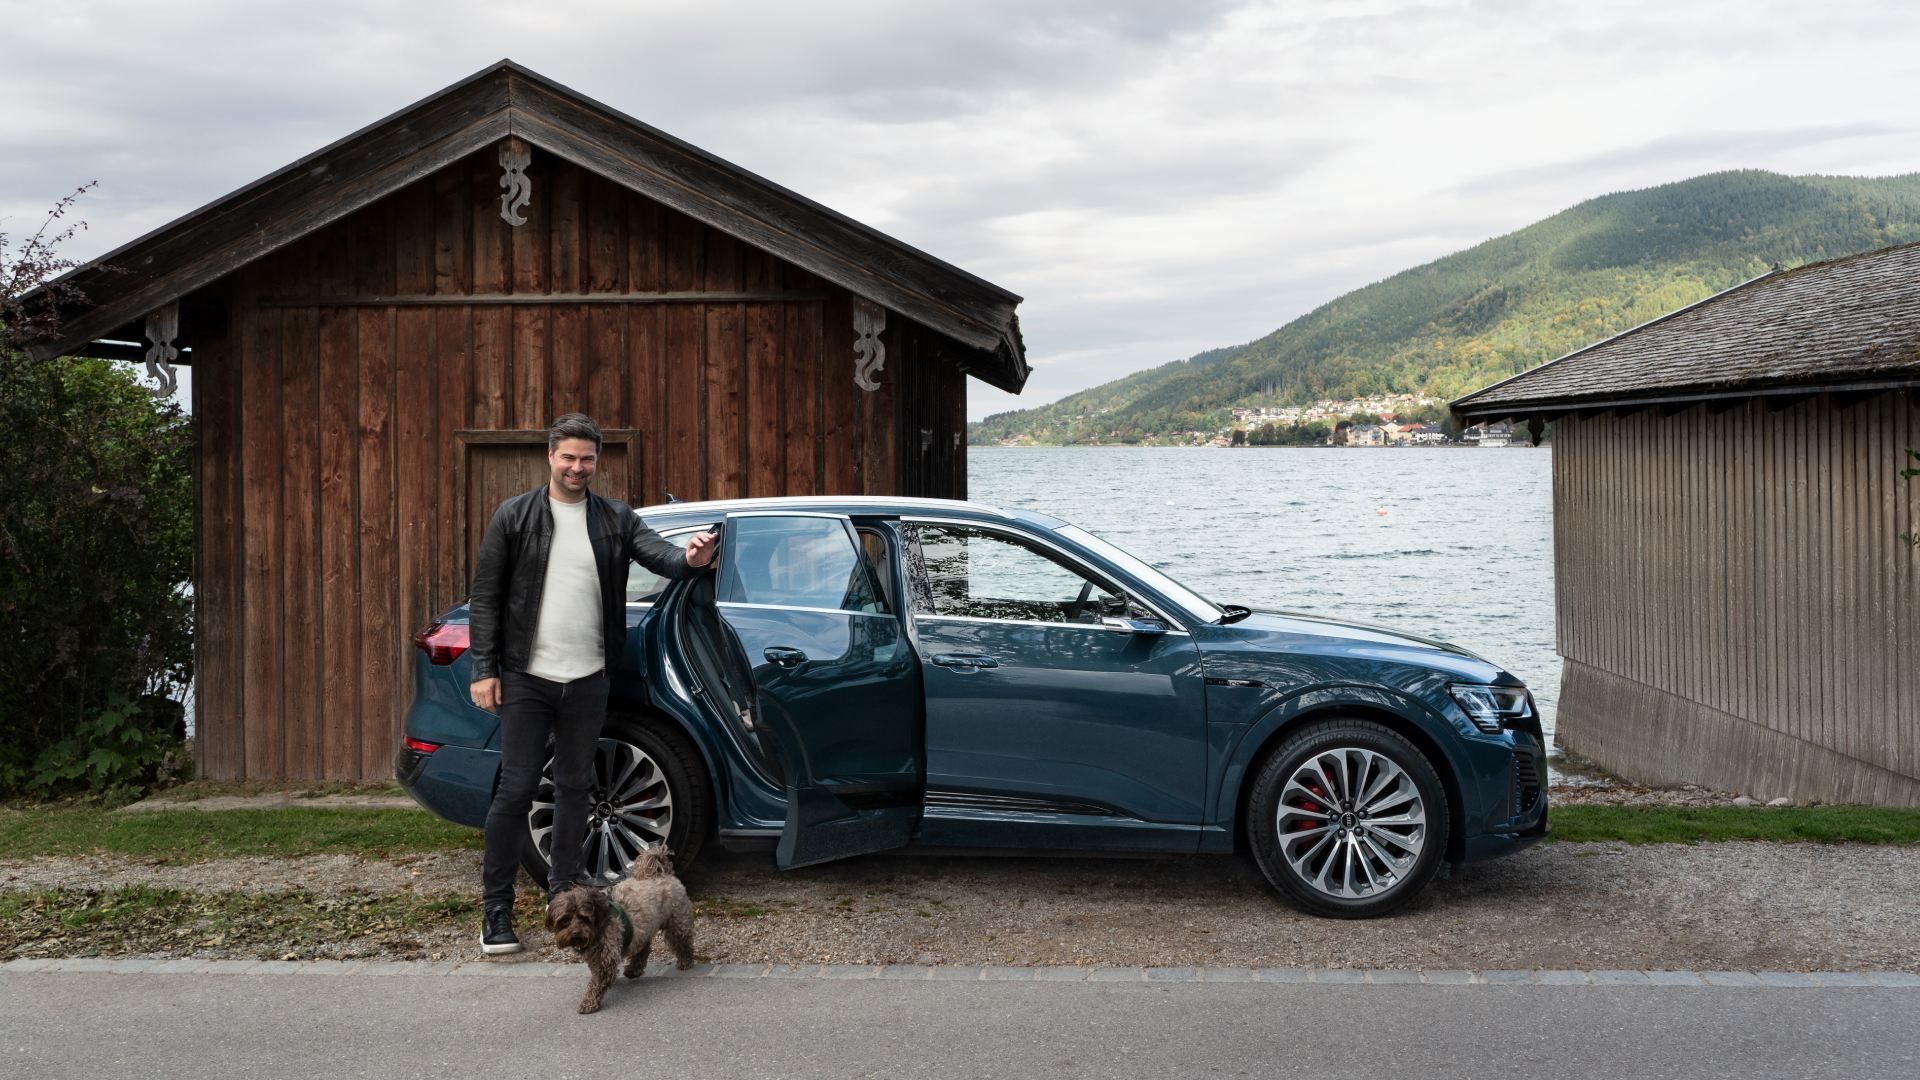 Nils Wollny getting out of the Audi with his dog.